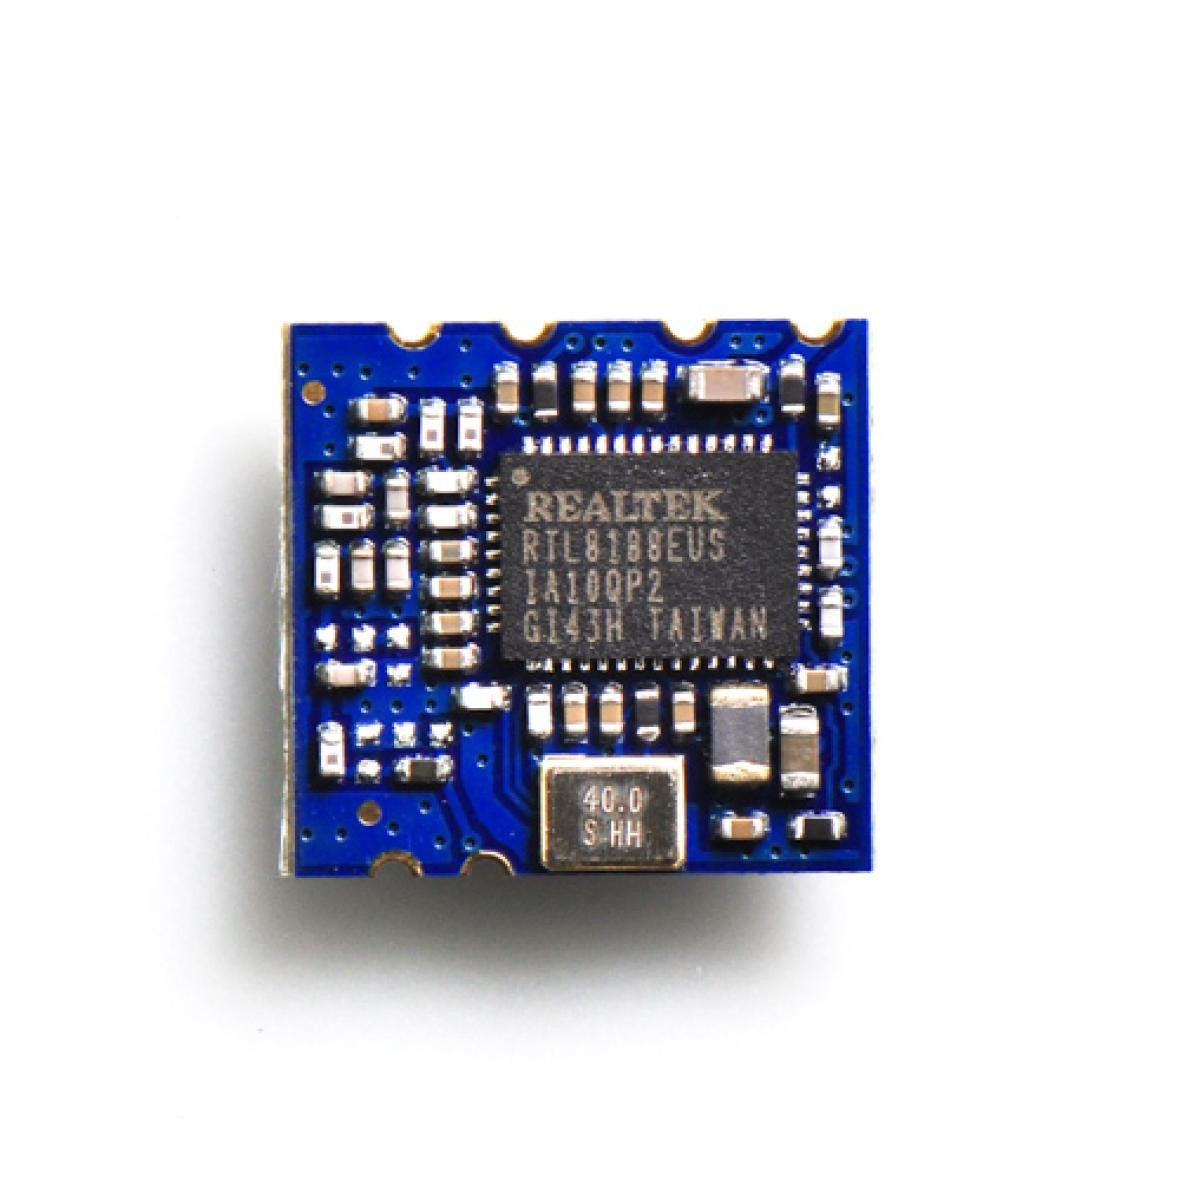 China RTL8188EUS 802.11n USB Realtek WiFi Module 2.4G 150Mbps For WiFi Adapter factory